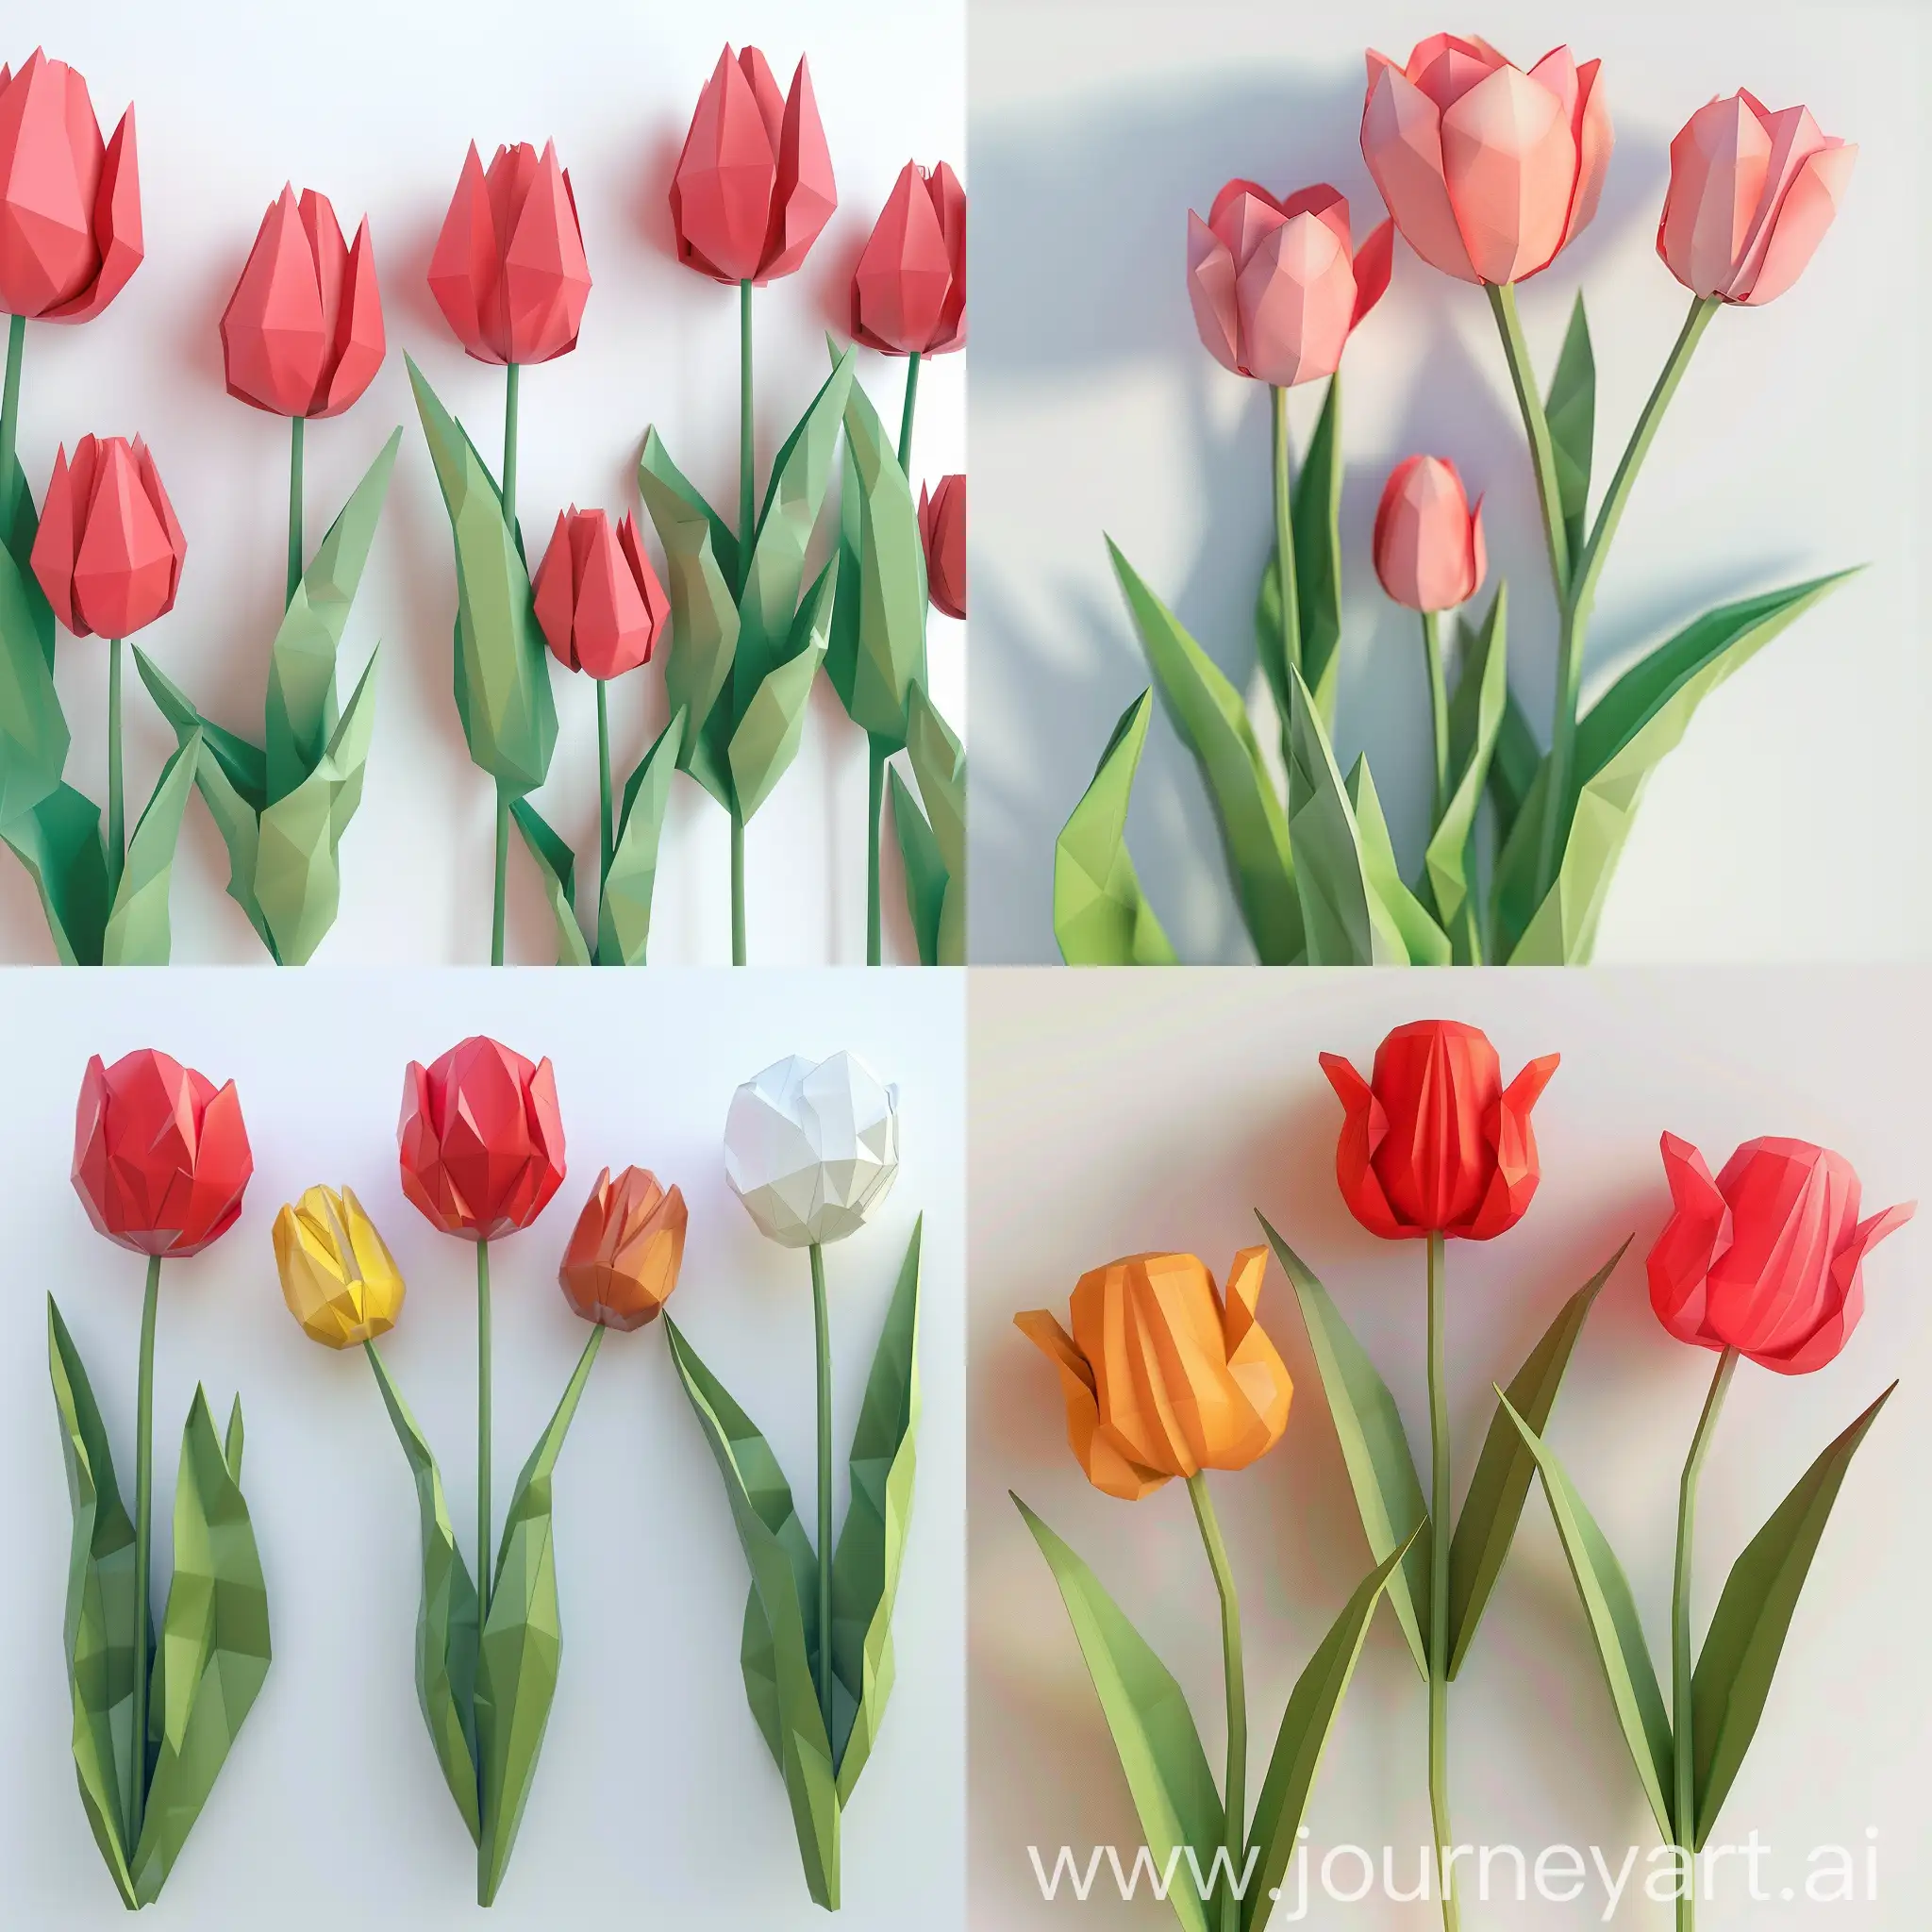 3d tulips on a white background, soft texture, low poly
